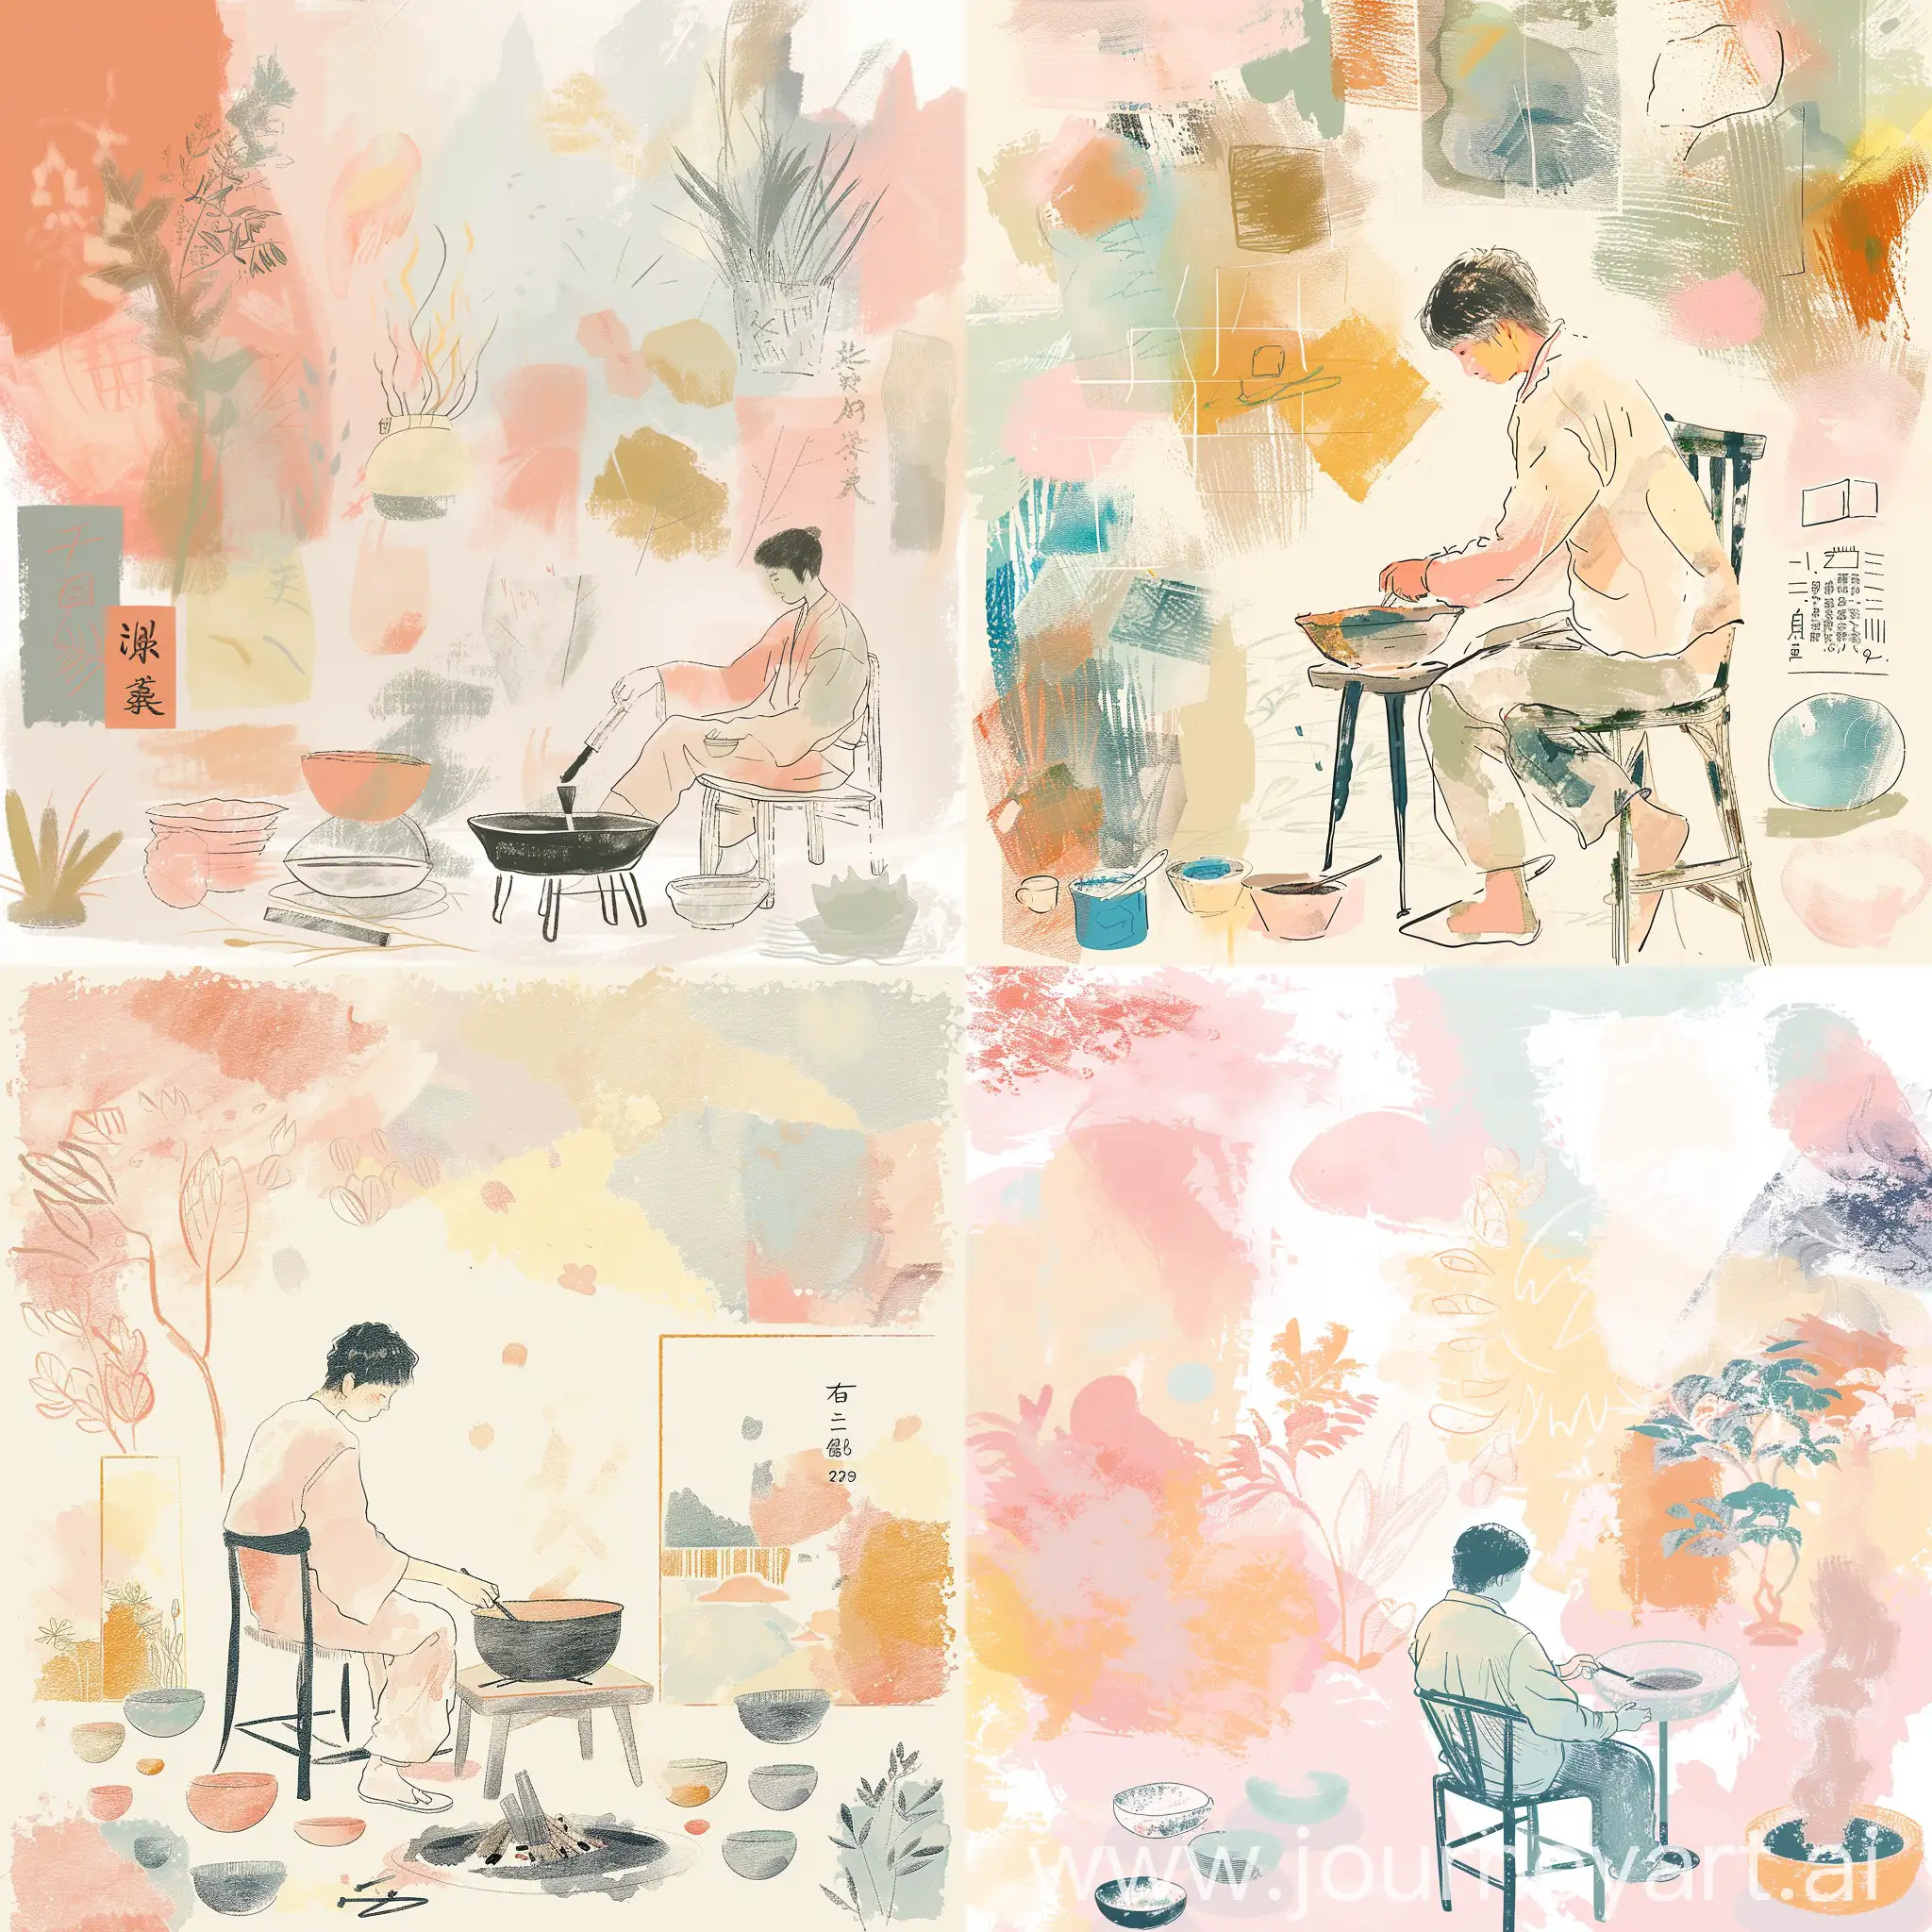 Sketch of a ((Japanese man)) in soft pastel colors, sitting on a chair, hard at work making a bowl. There is a (charcoal) (brazier) in which he is making and various bowl shapes in the style of bowl work. The background is a variety of oil and watercolor paintings in the style of Matisse , a peaceful scene of creative expression. Simple lines and flat colors, illustration, simplicity, Y2K